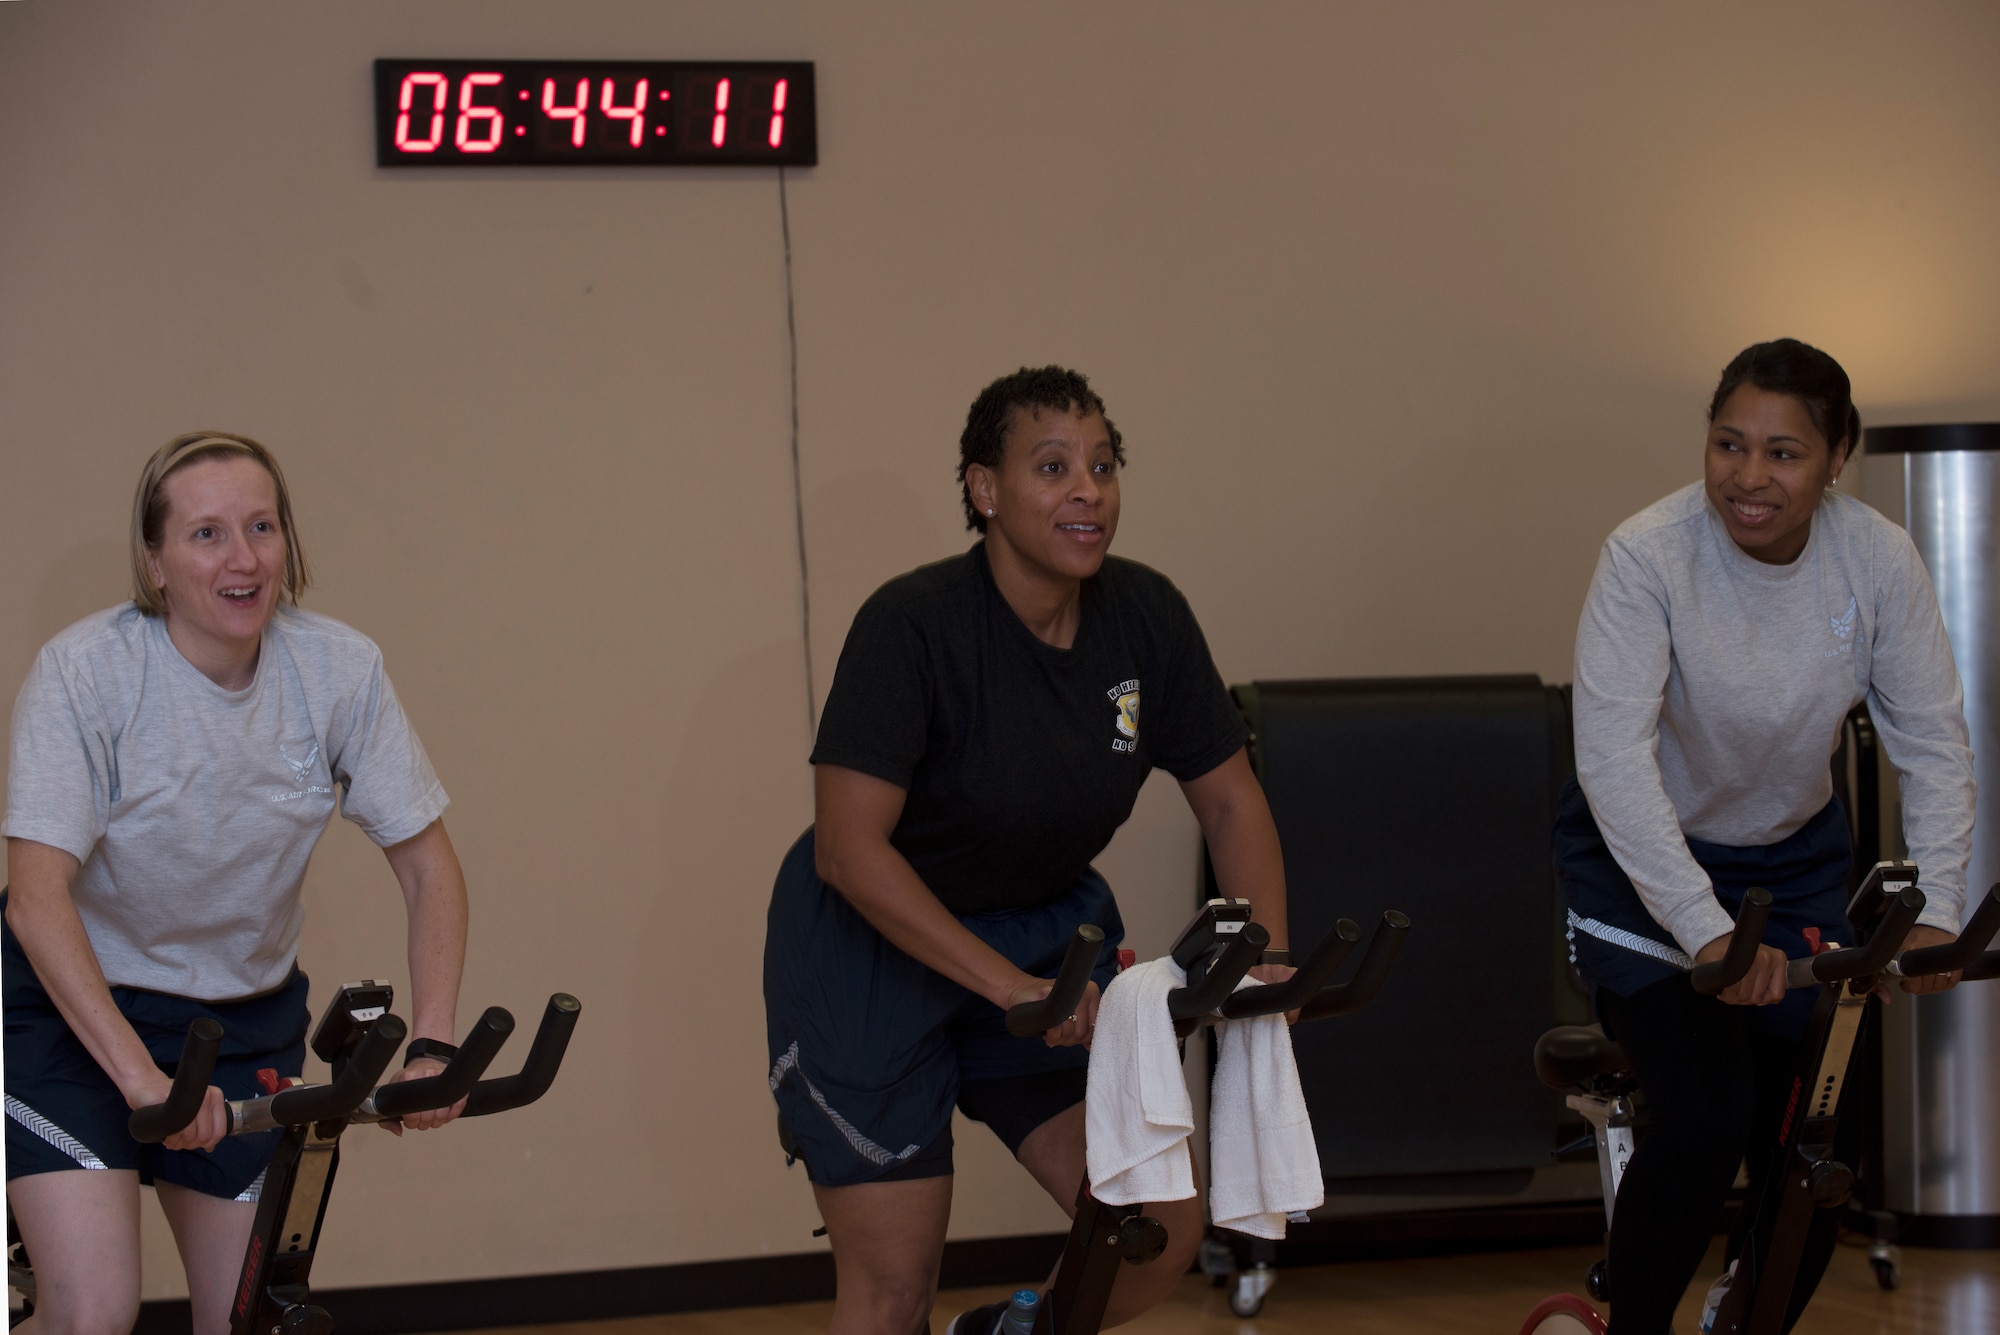 Col. Chrystal Henderson, commander of the 509th Medical Group, and other 509th MDG leaders, participate in a cycling class on October 10, 2019, at Whiteman Air Force Base, Missouri. The class served as part of the Health and Readiness Optimization (HeRO) strategy, an initiative newly adopted by the Air Force to address targets for health improvements in areas such as physical activity, nutrition, sleep and nicotine cessation. (U.S. Air Force photo by Staff Sgt. Kayla White)